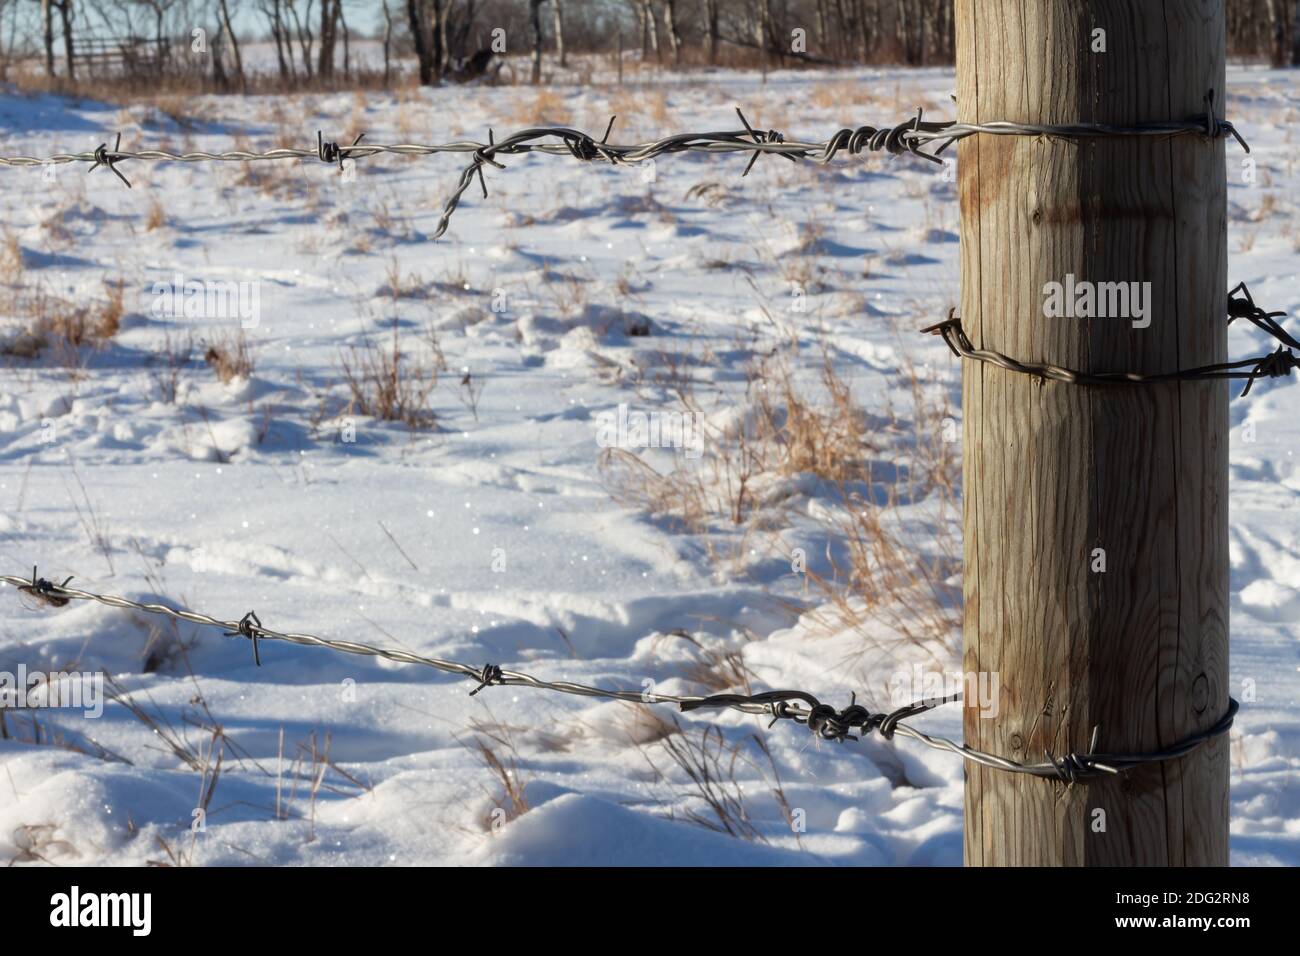 Weathered wooden fence post with barbed wire fence lines in winter snow field pasture, grasses and snow on ground Stock Photo